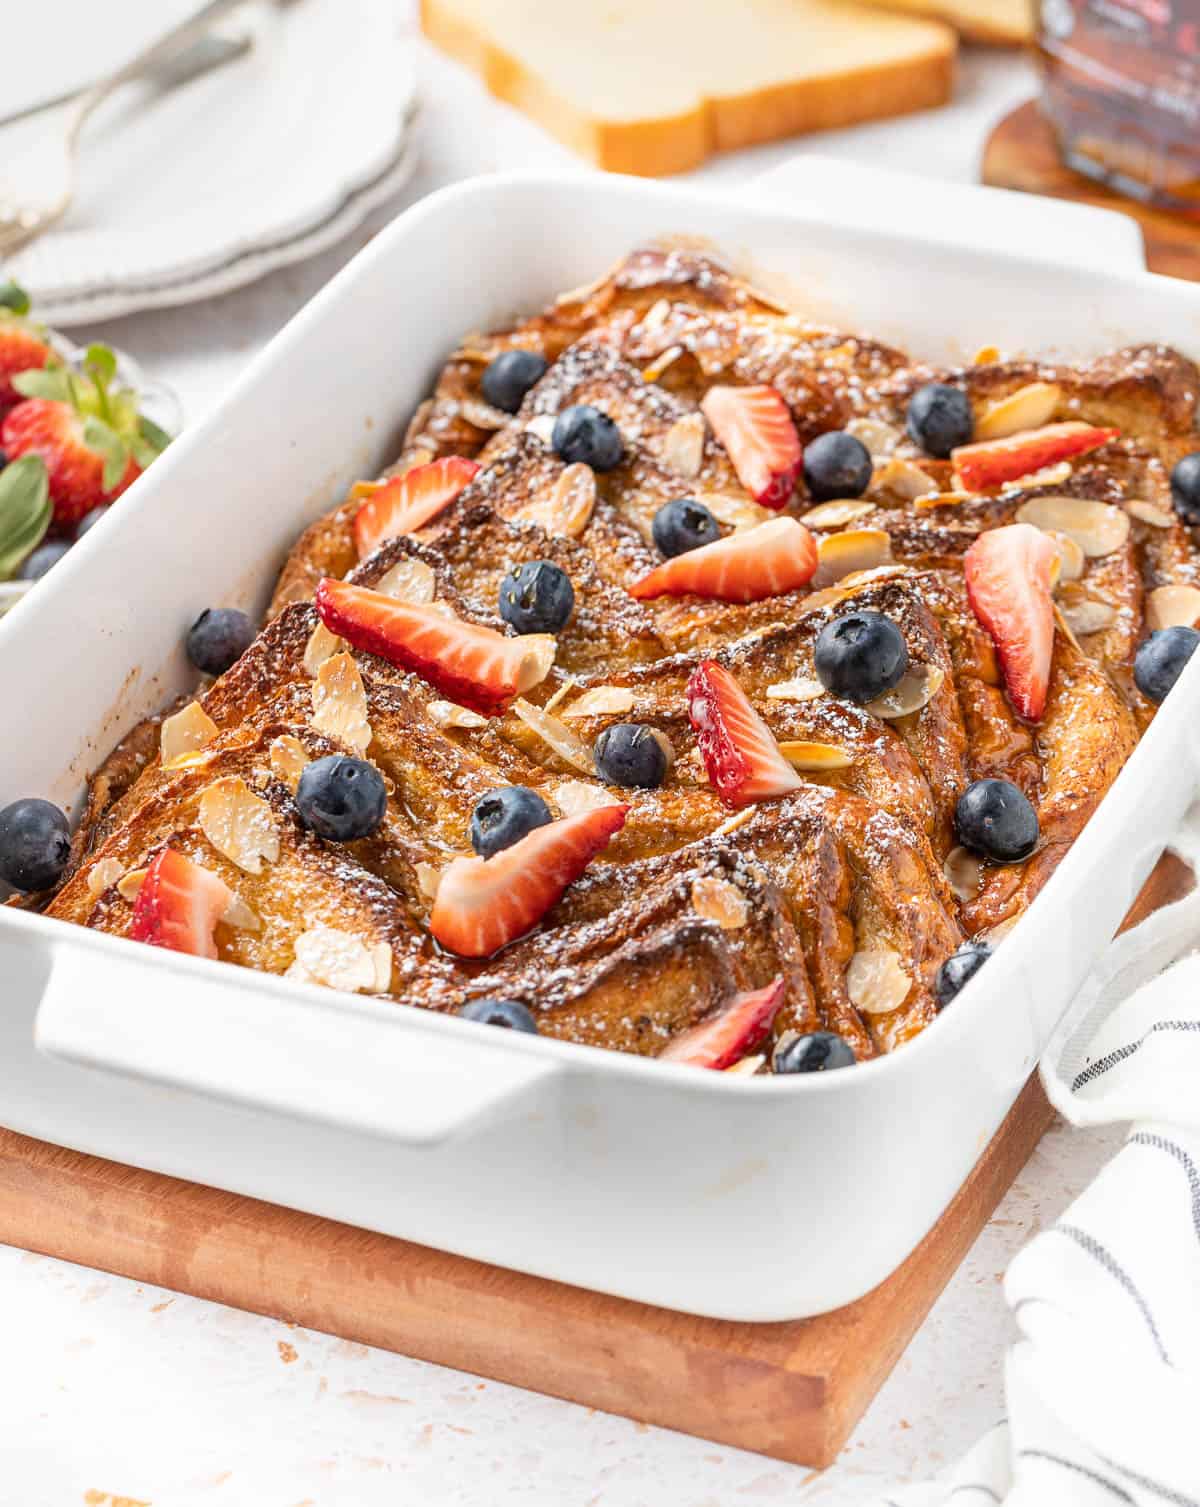 French toast bake in a white ceramic baking dish over a wooden cutting board.